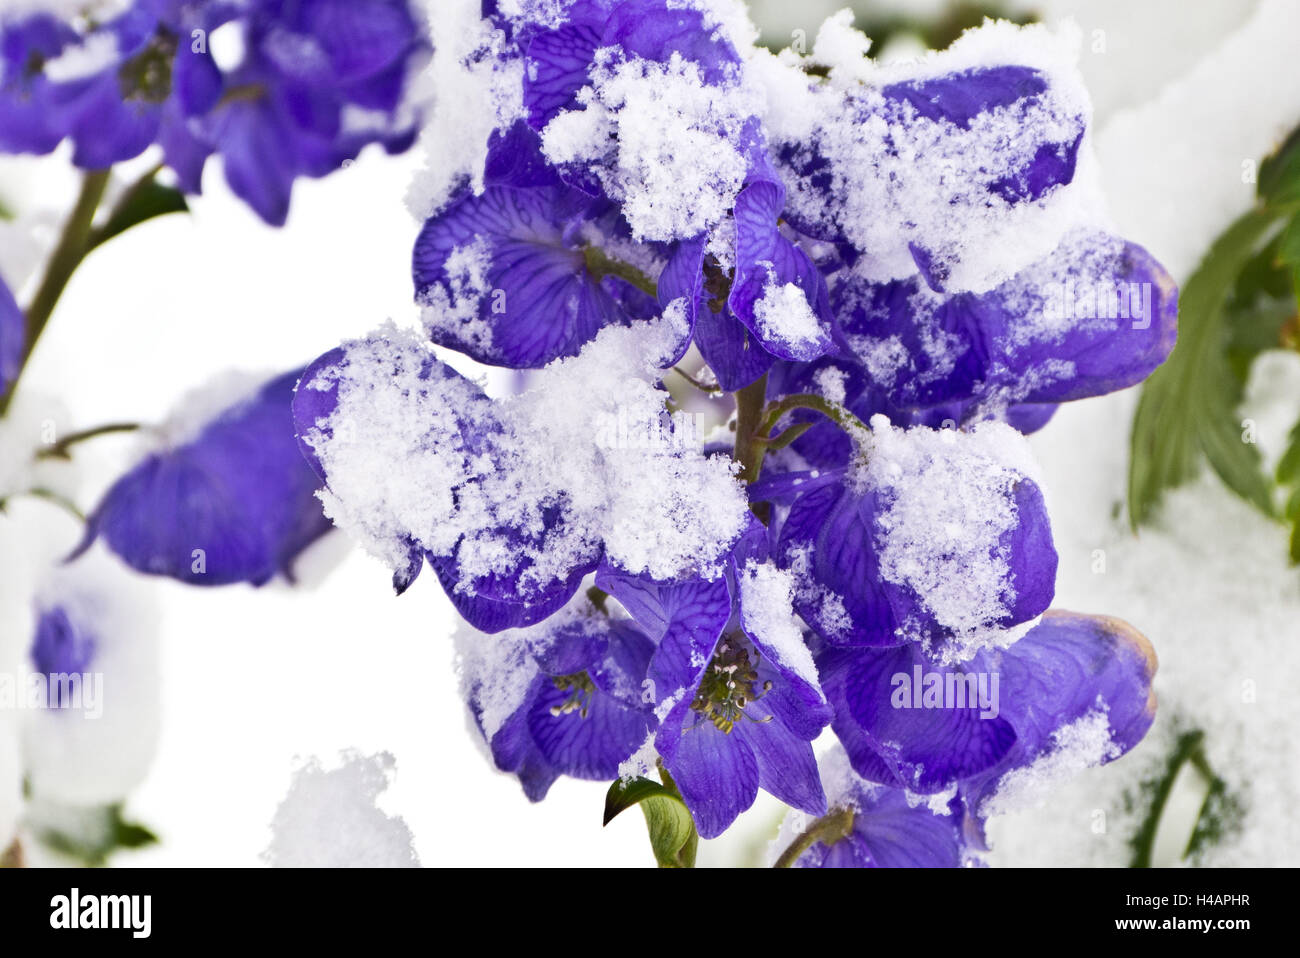 Blossoms of the blue monk's-hood, Aconitum napellus, snowy, Stock Photo